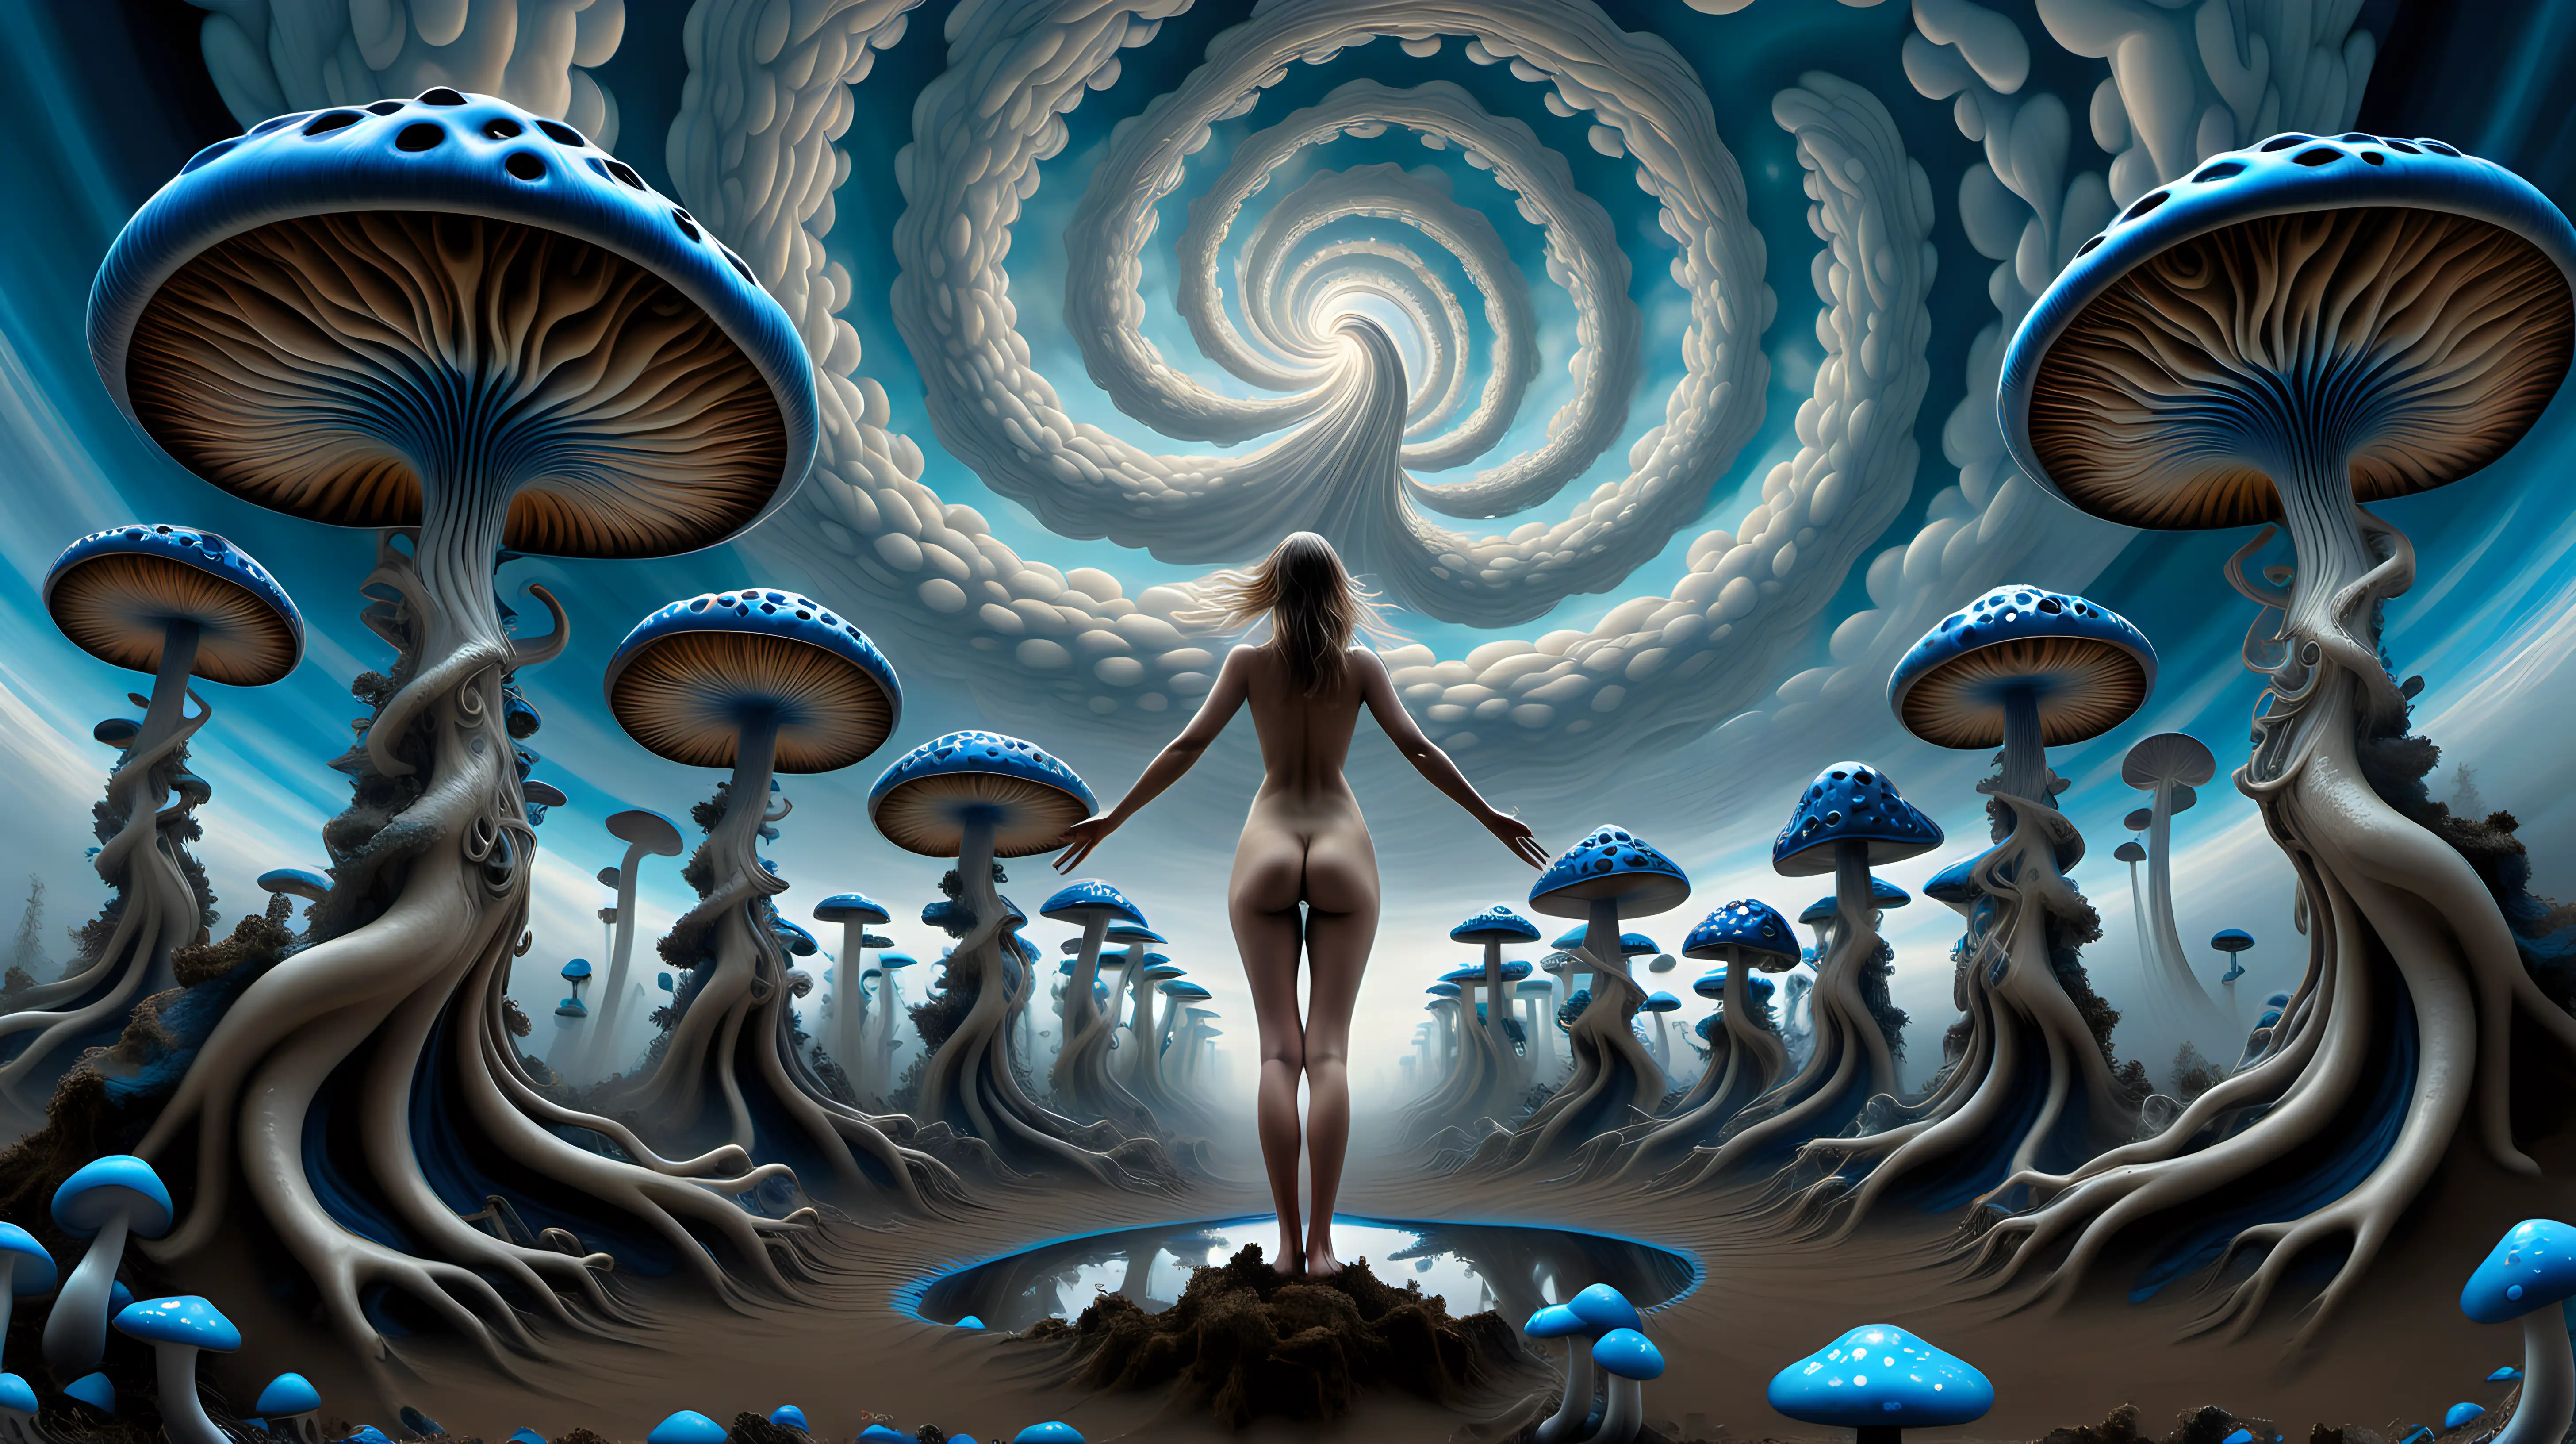 Ethereal Psychedelic Scene Nude Woman Amidst Swirling Fractal Sky and Blue Mushrooms